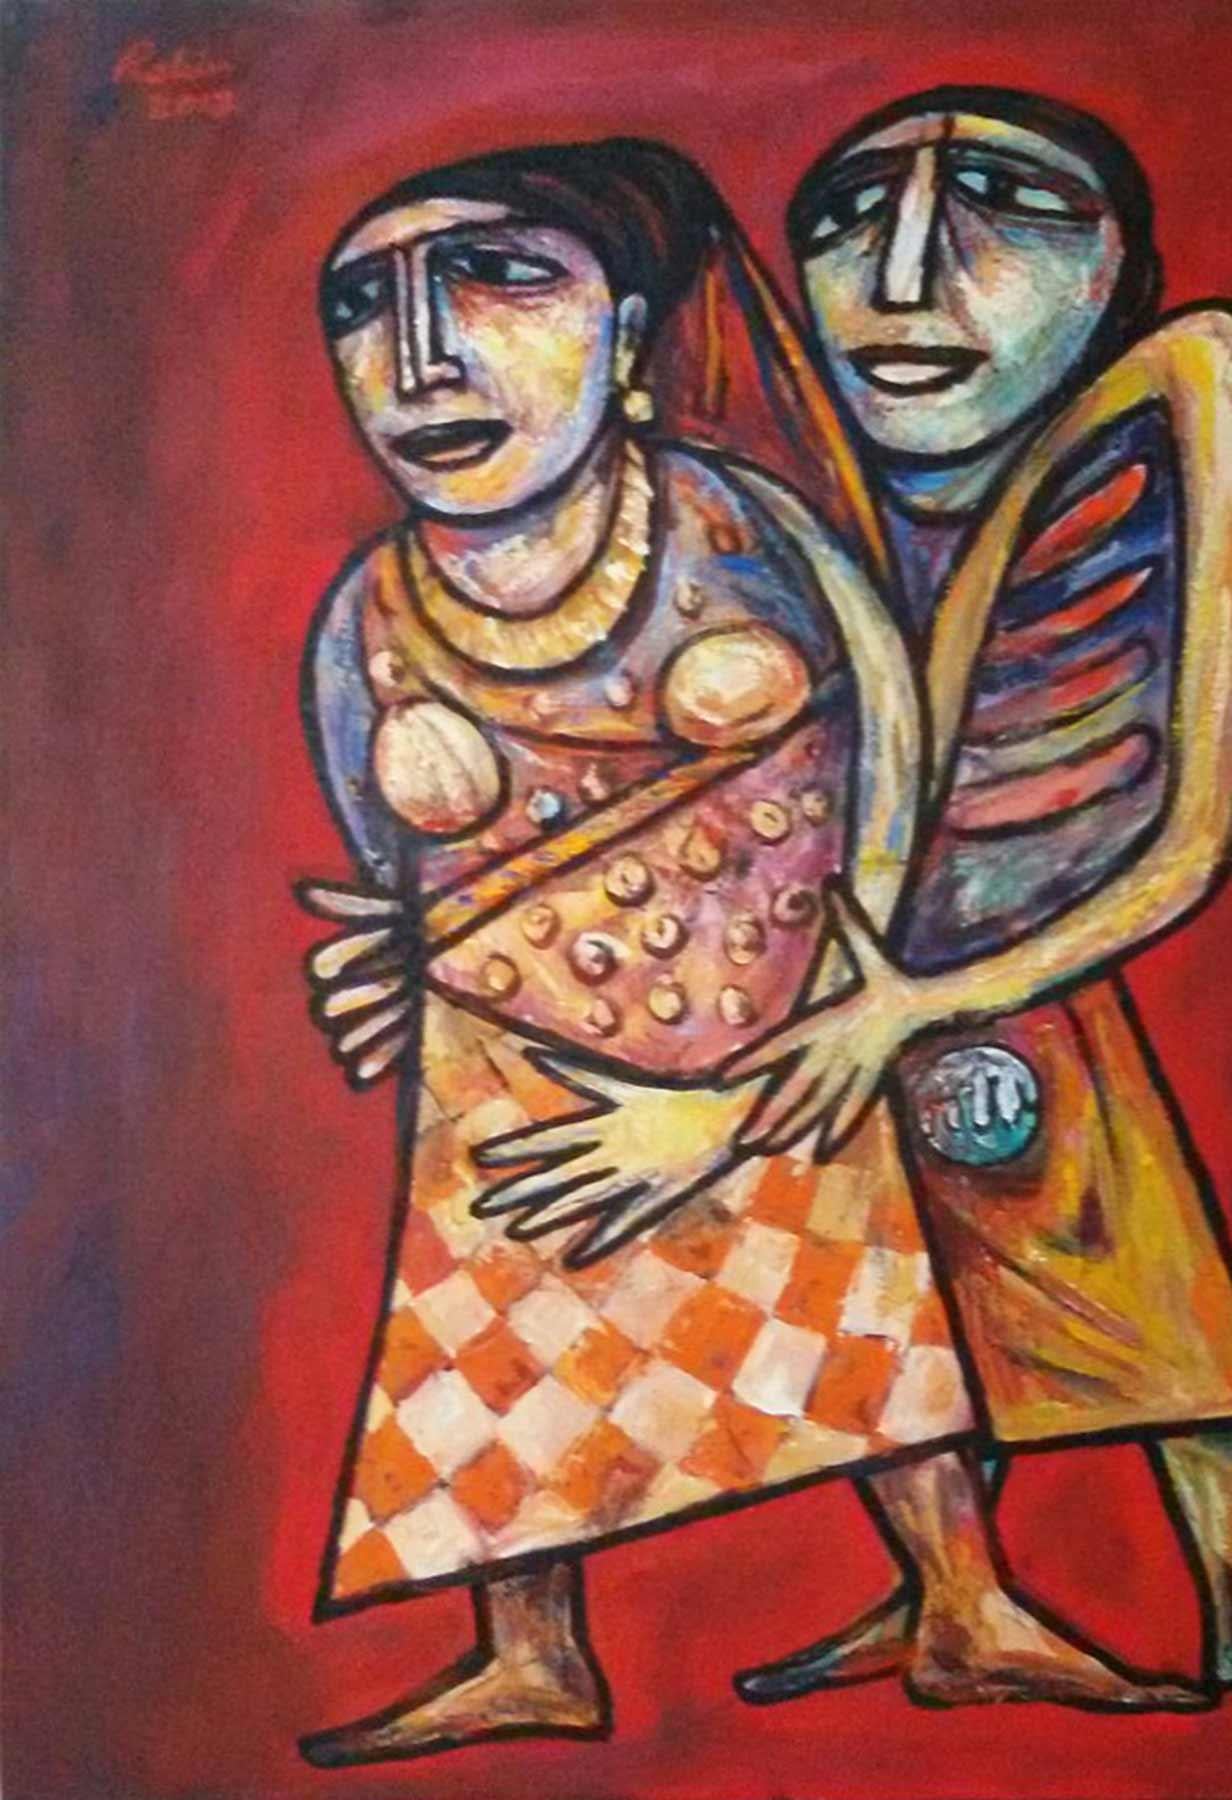 Rabin Mondal - Untitled - 42 x 36 inches (unframed size)
Acrylic on Canvas


Style : Mondal`s works are mainly figurative. He paints in bold strokes and creates tableaux, whose themes are universal. The faces of his figures stare at you out of the